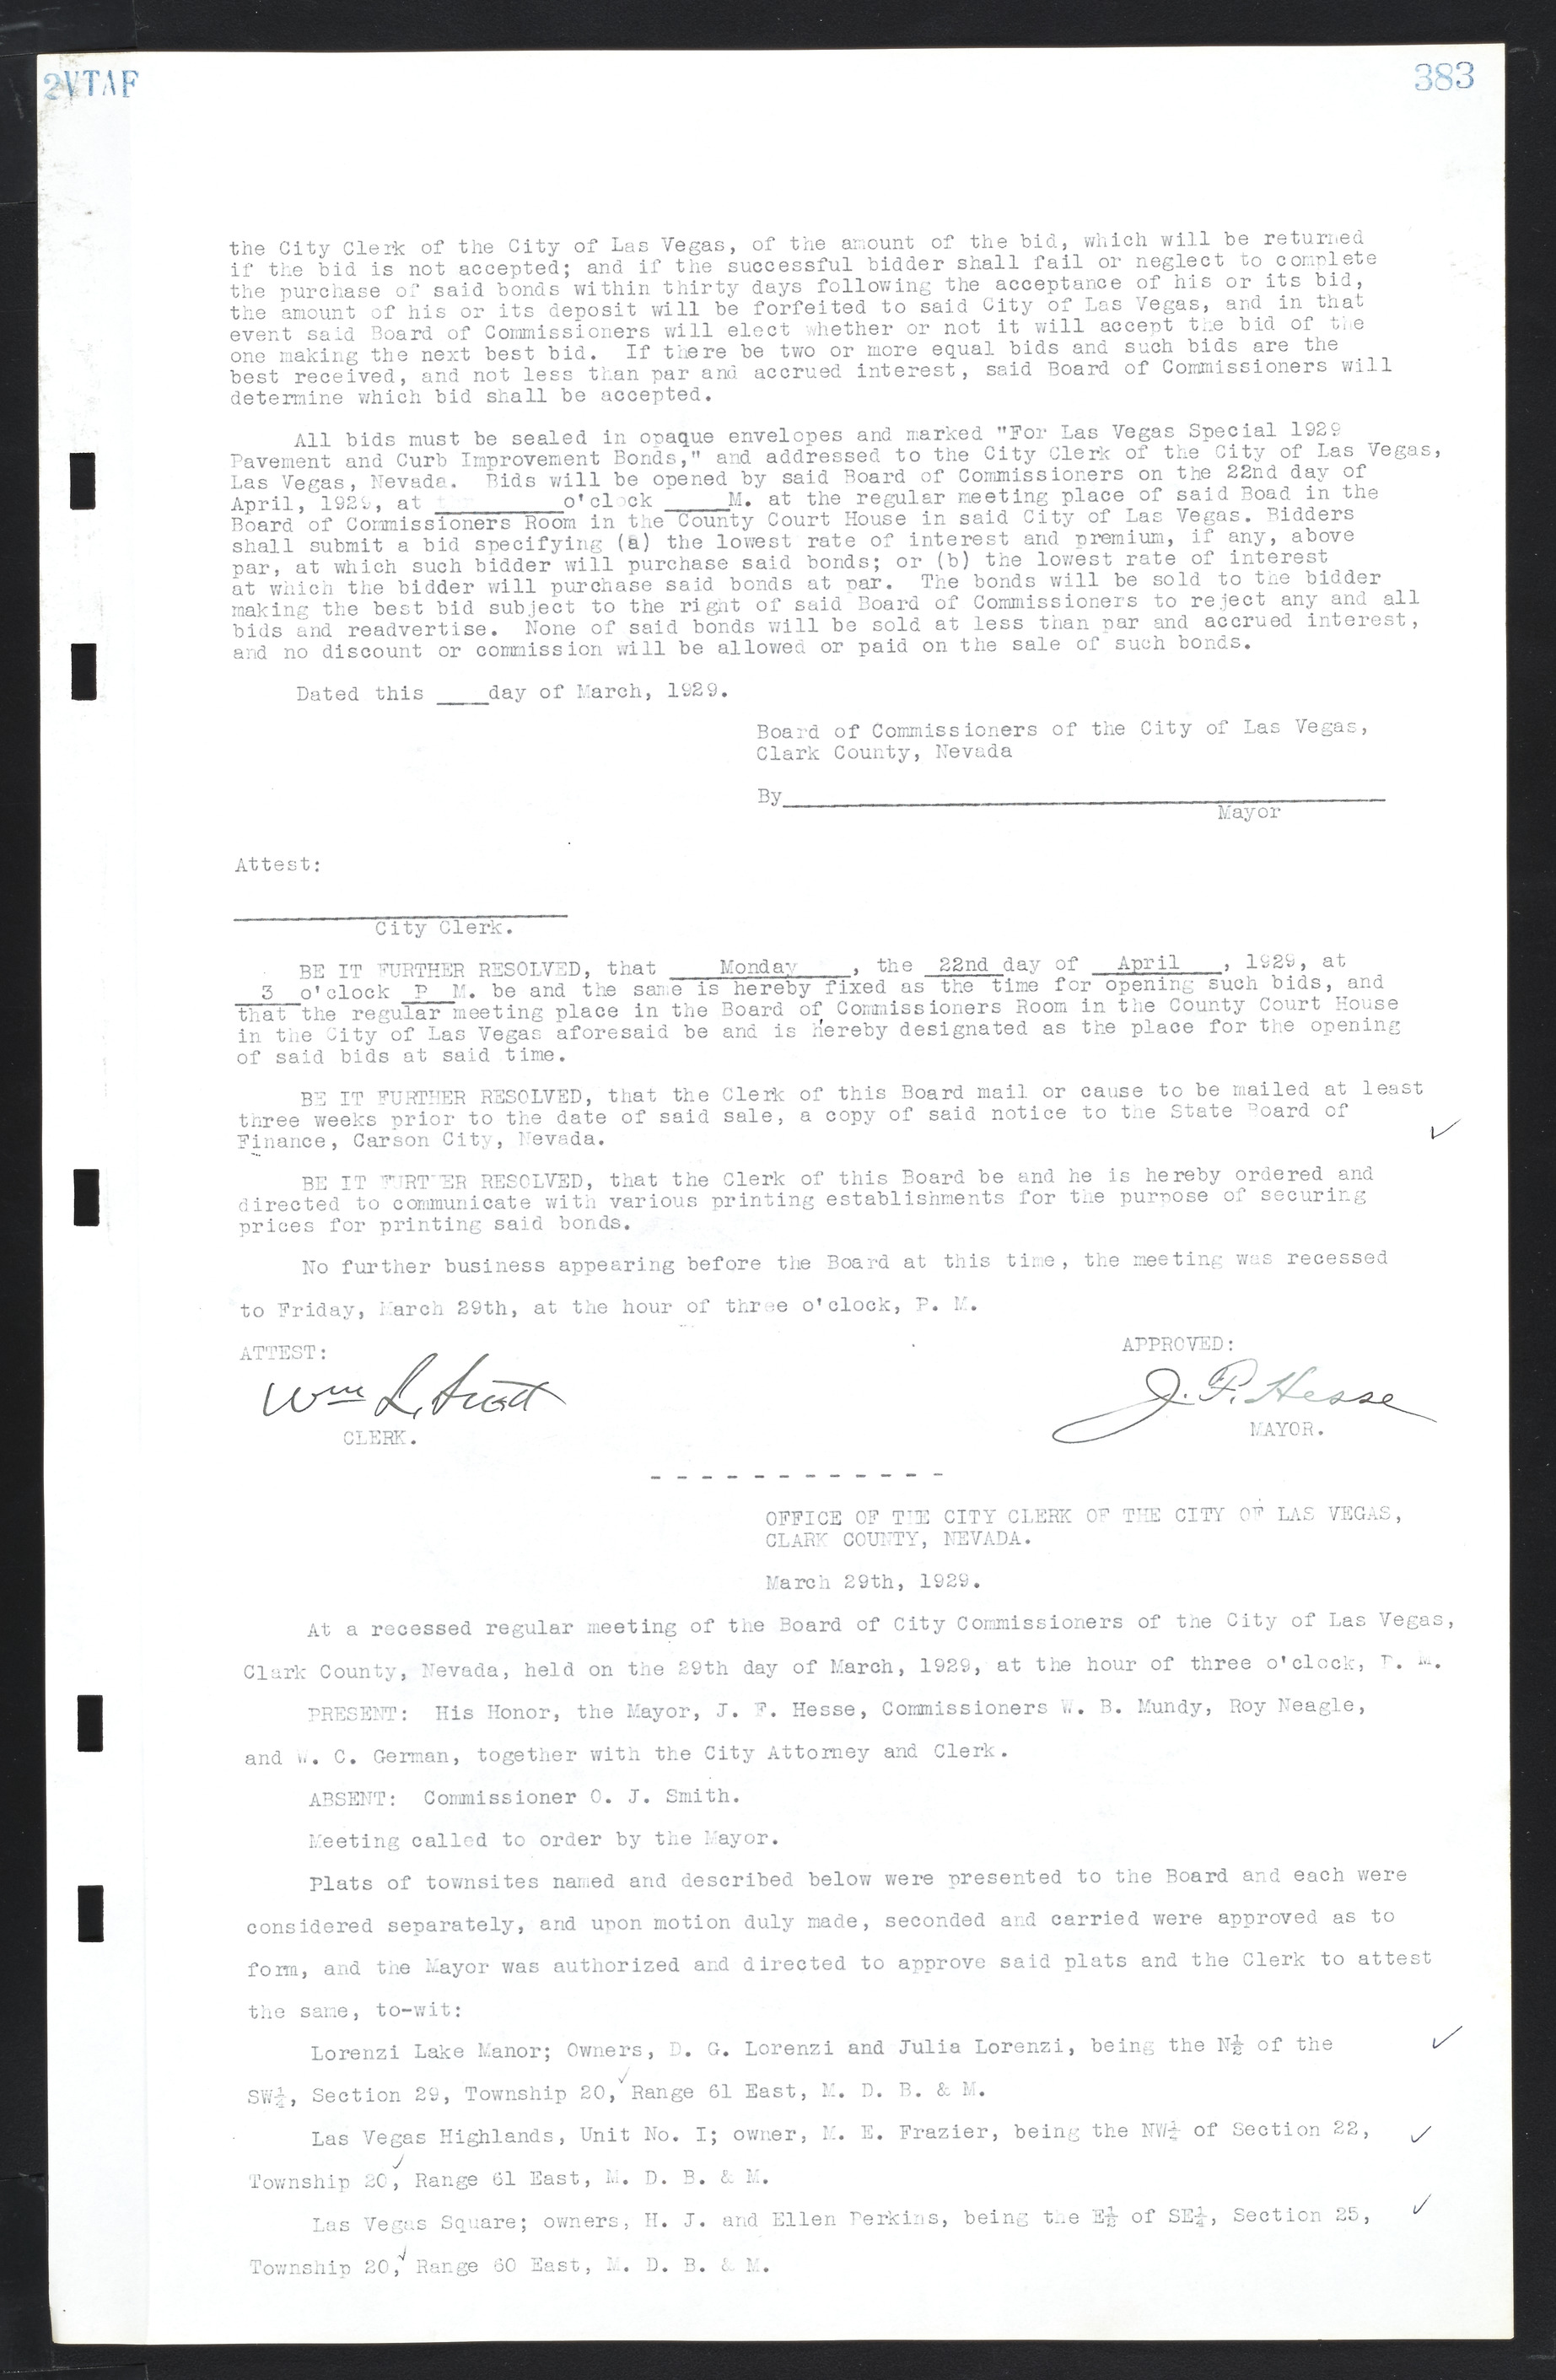 Las Vegas City Commission Minutes, March 1, 1922 to May 10, 1929, lvc000002-392